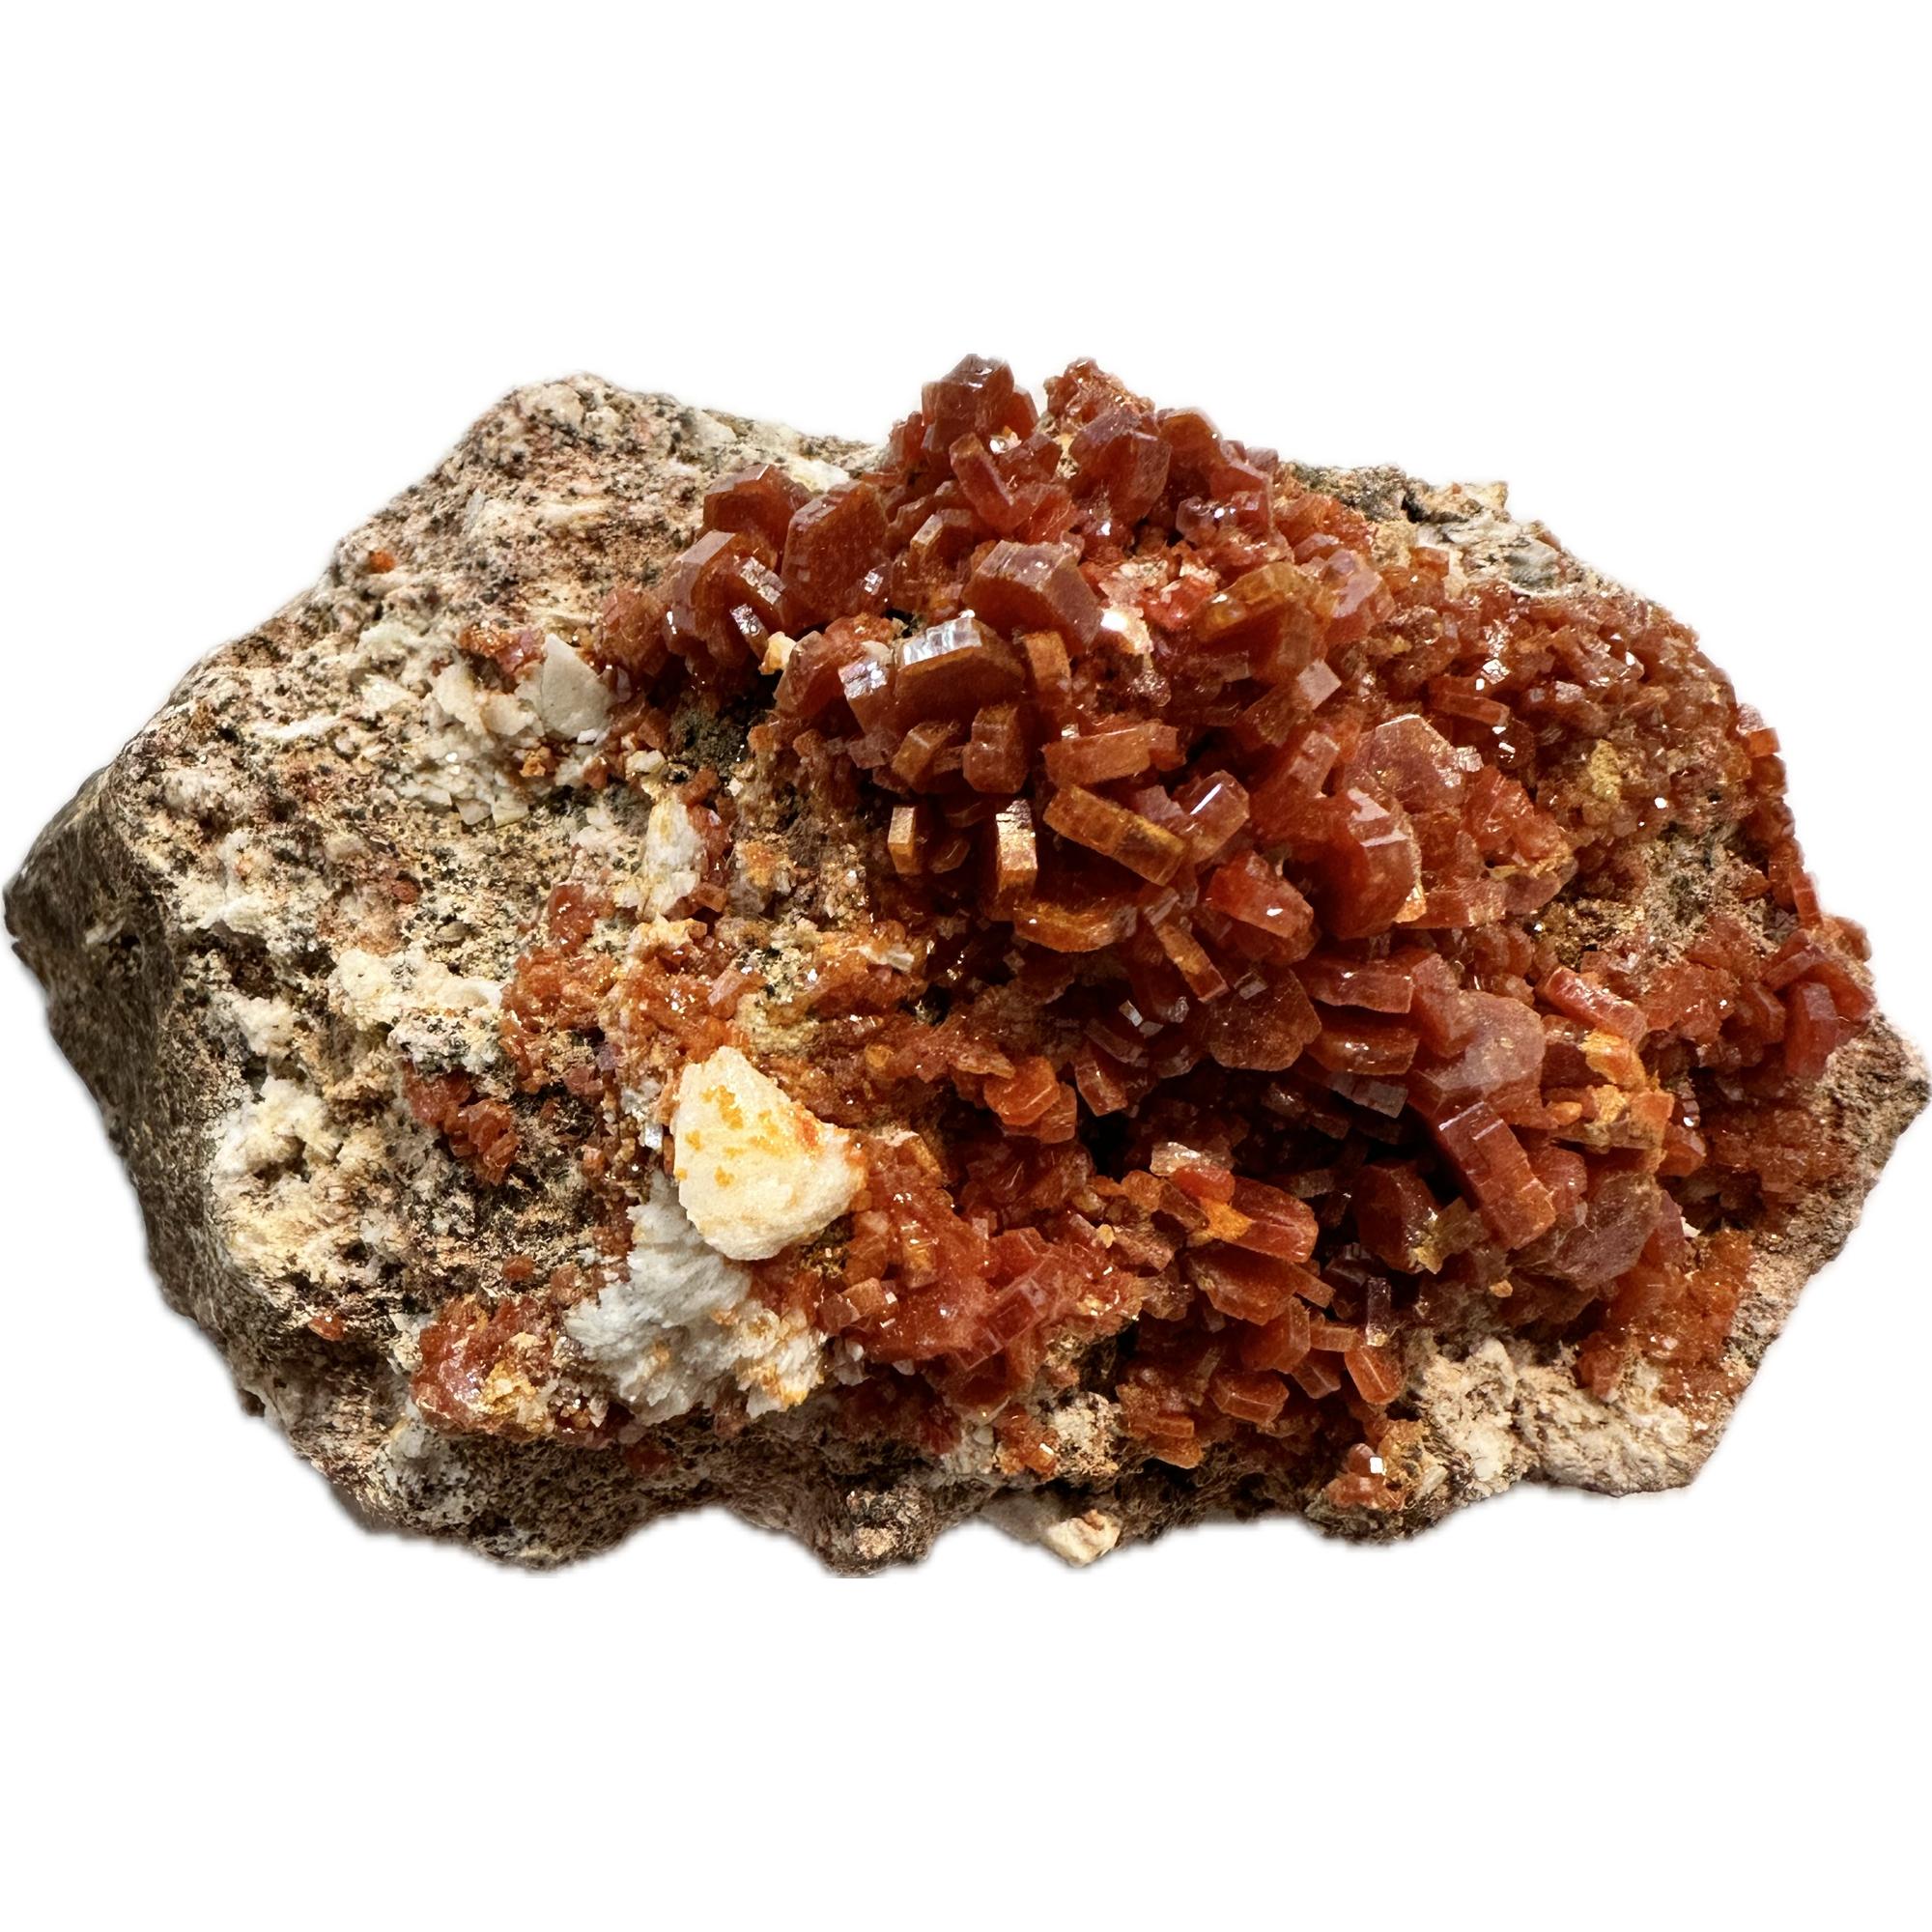 This is a picture of a vanadinite cluster. The crystals are a bright red color.